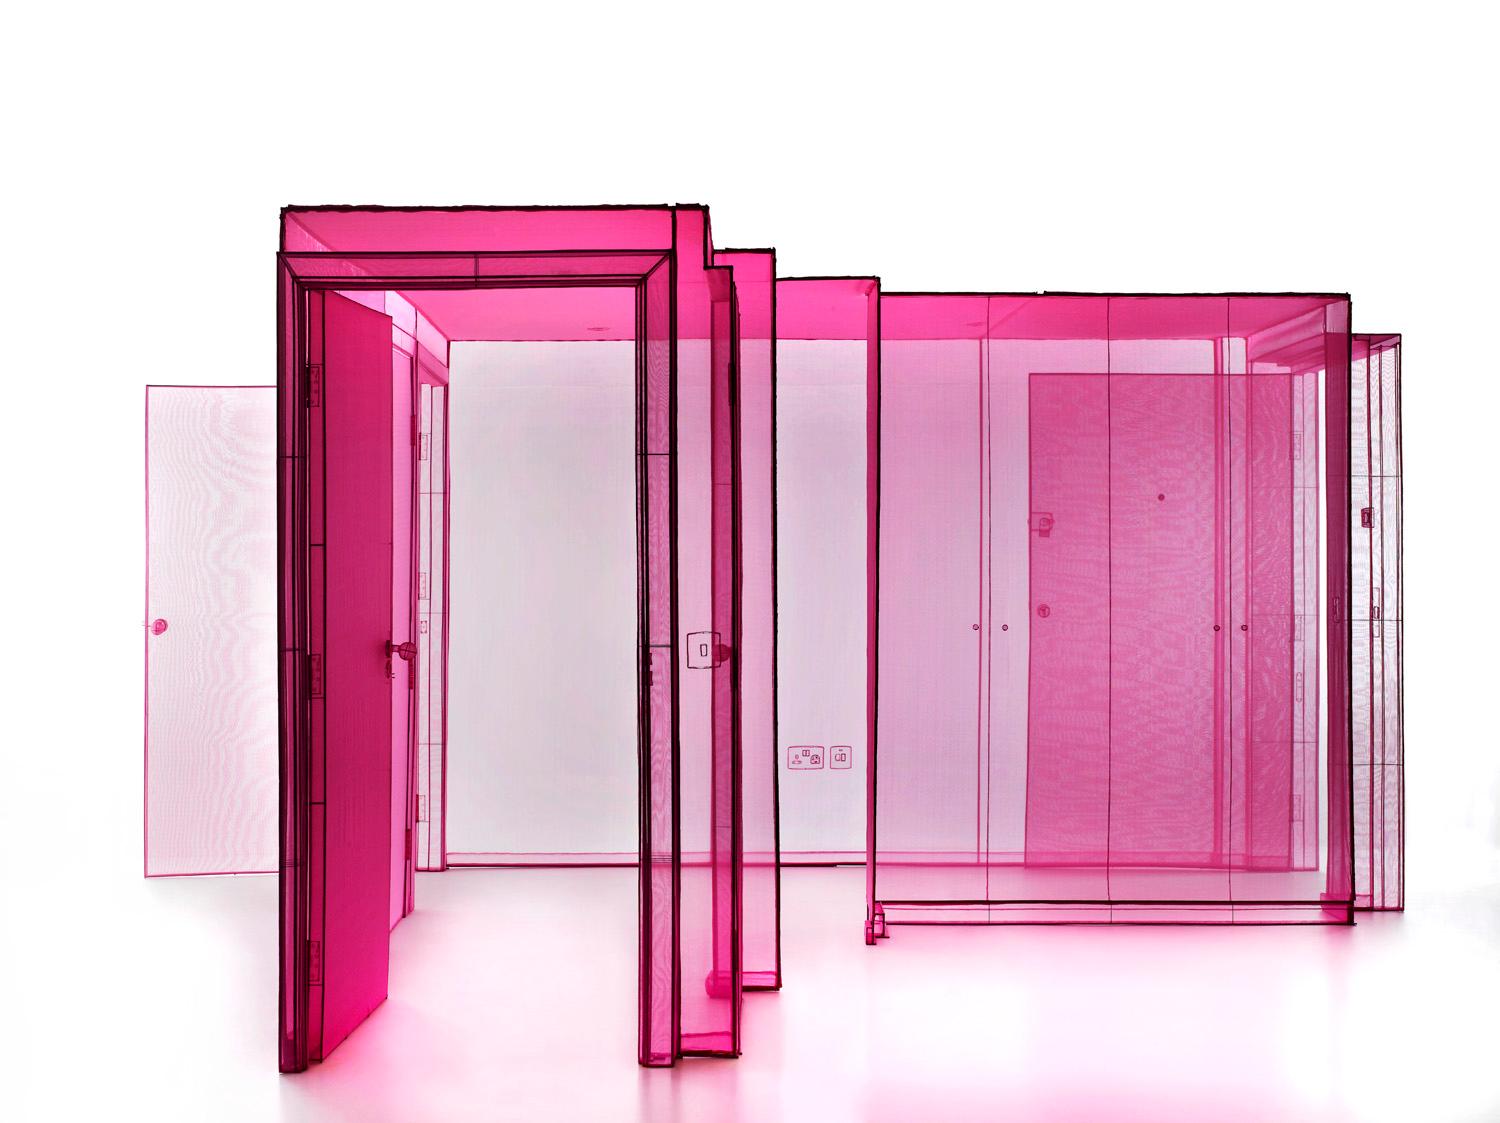 Hub, 310 Union Wharf, 23 Wenlock Road, London, N1 7ST, UK - Conceptual Sculpture by Do Ho Suh